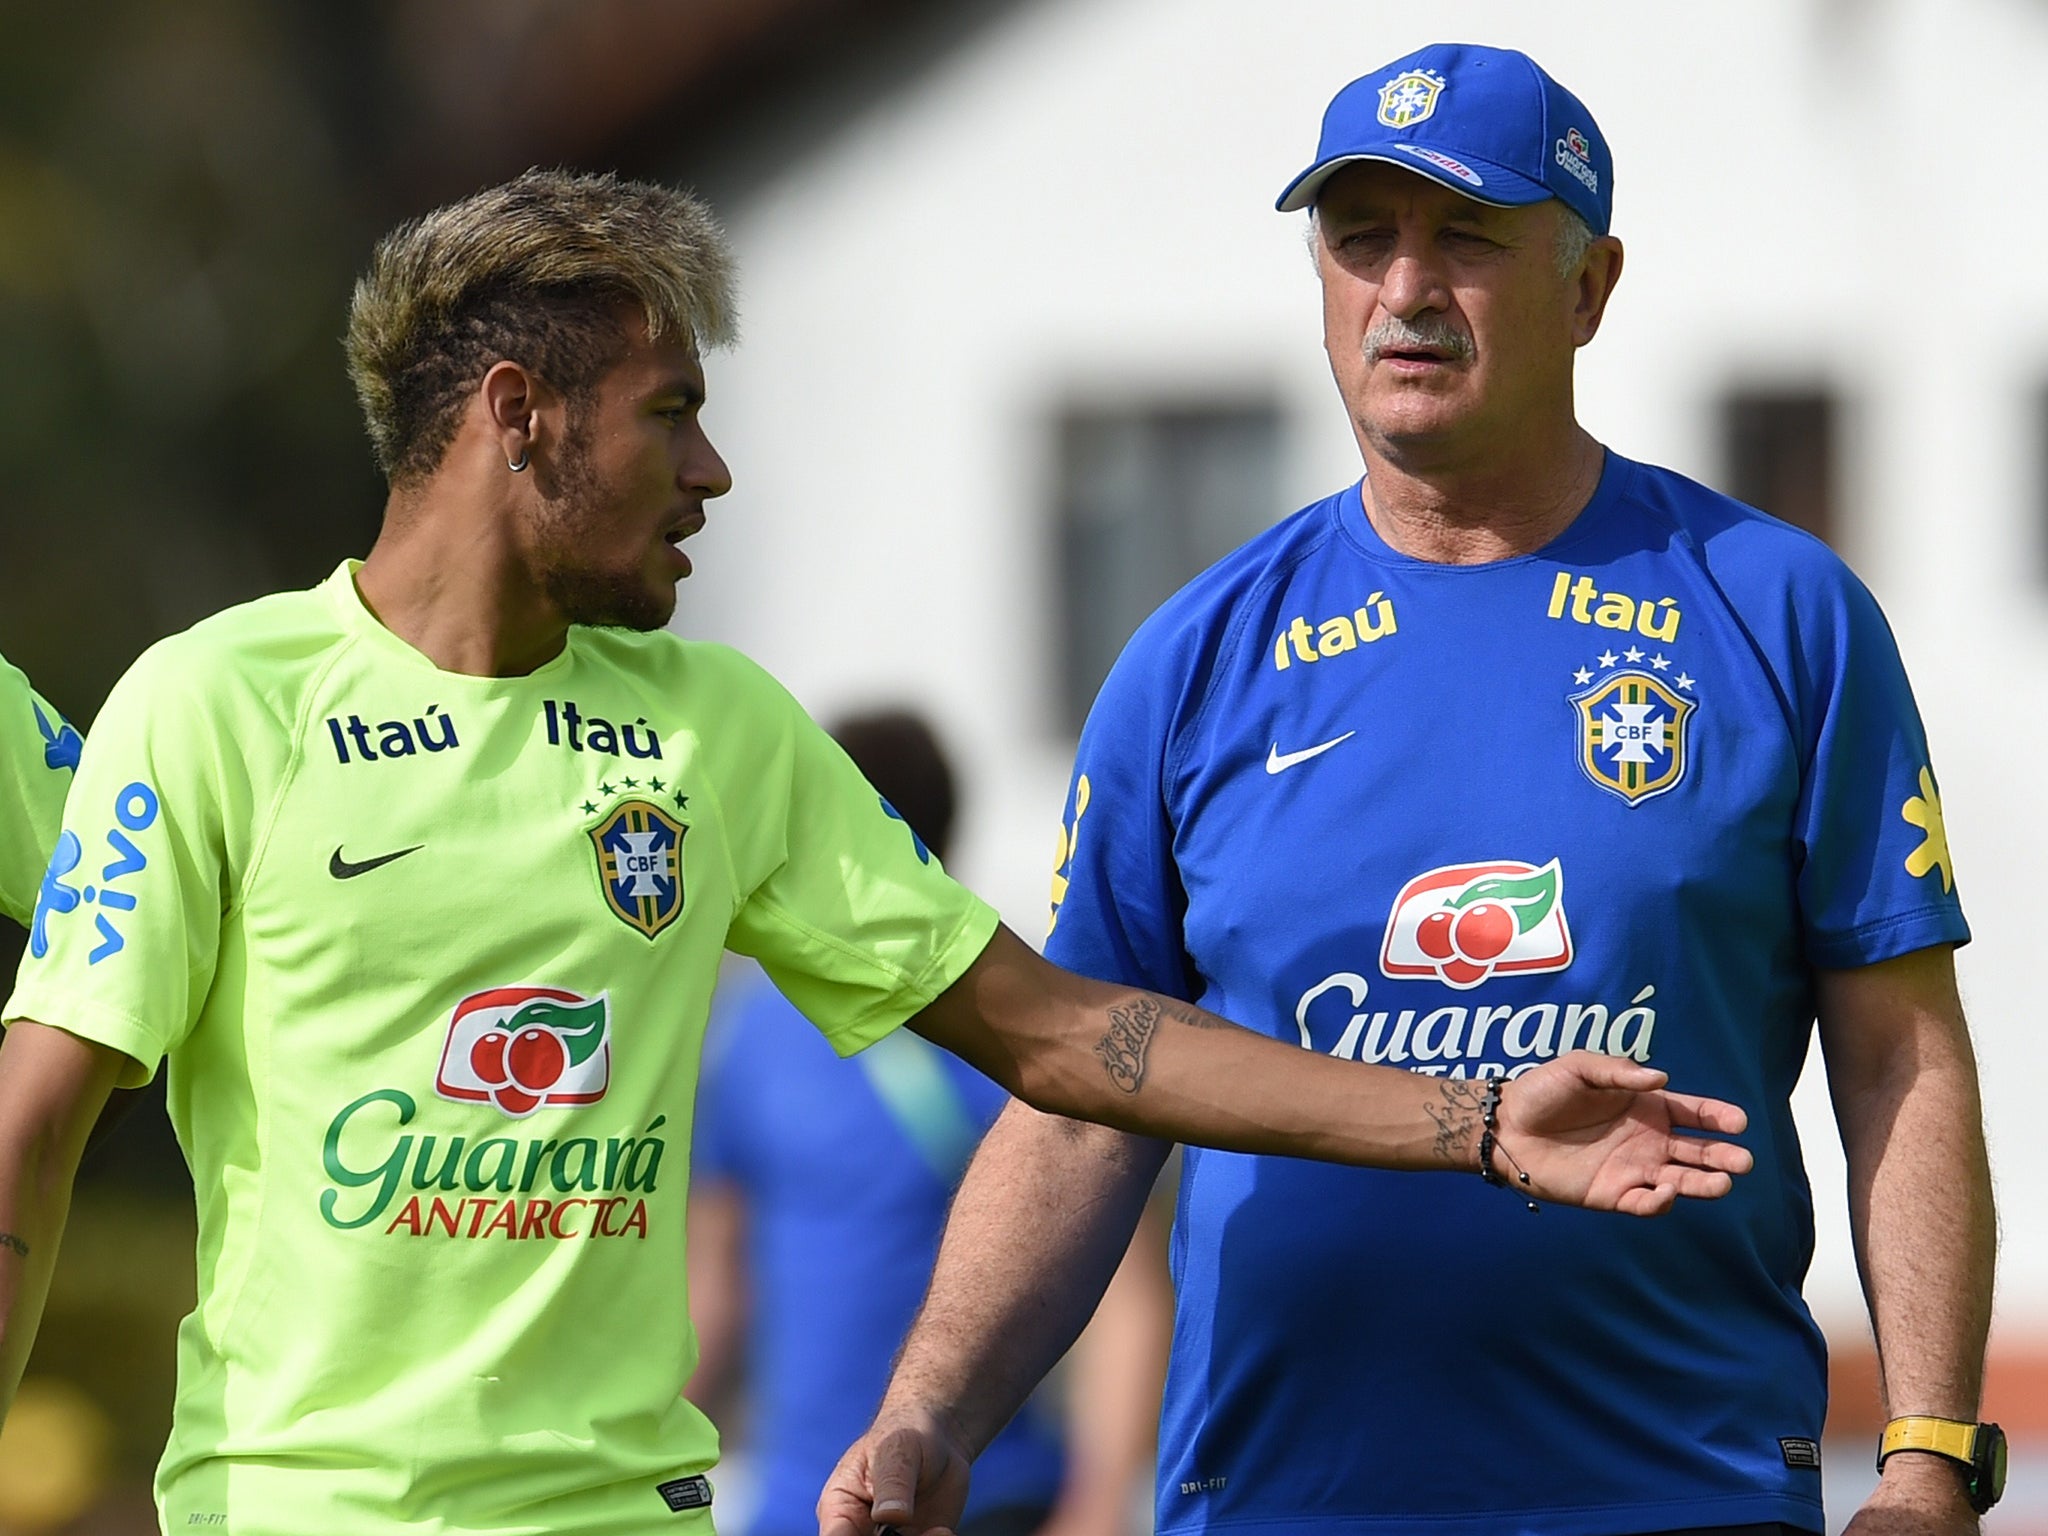 Neymar and Scolari pictured preparing ahead of the Chile match